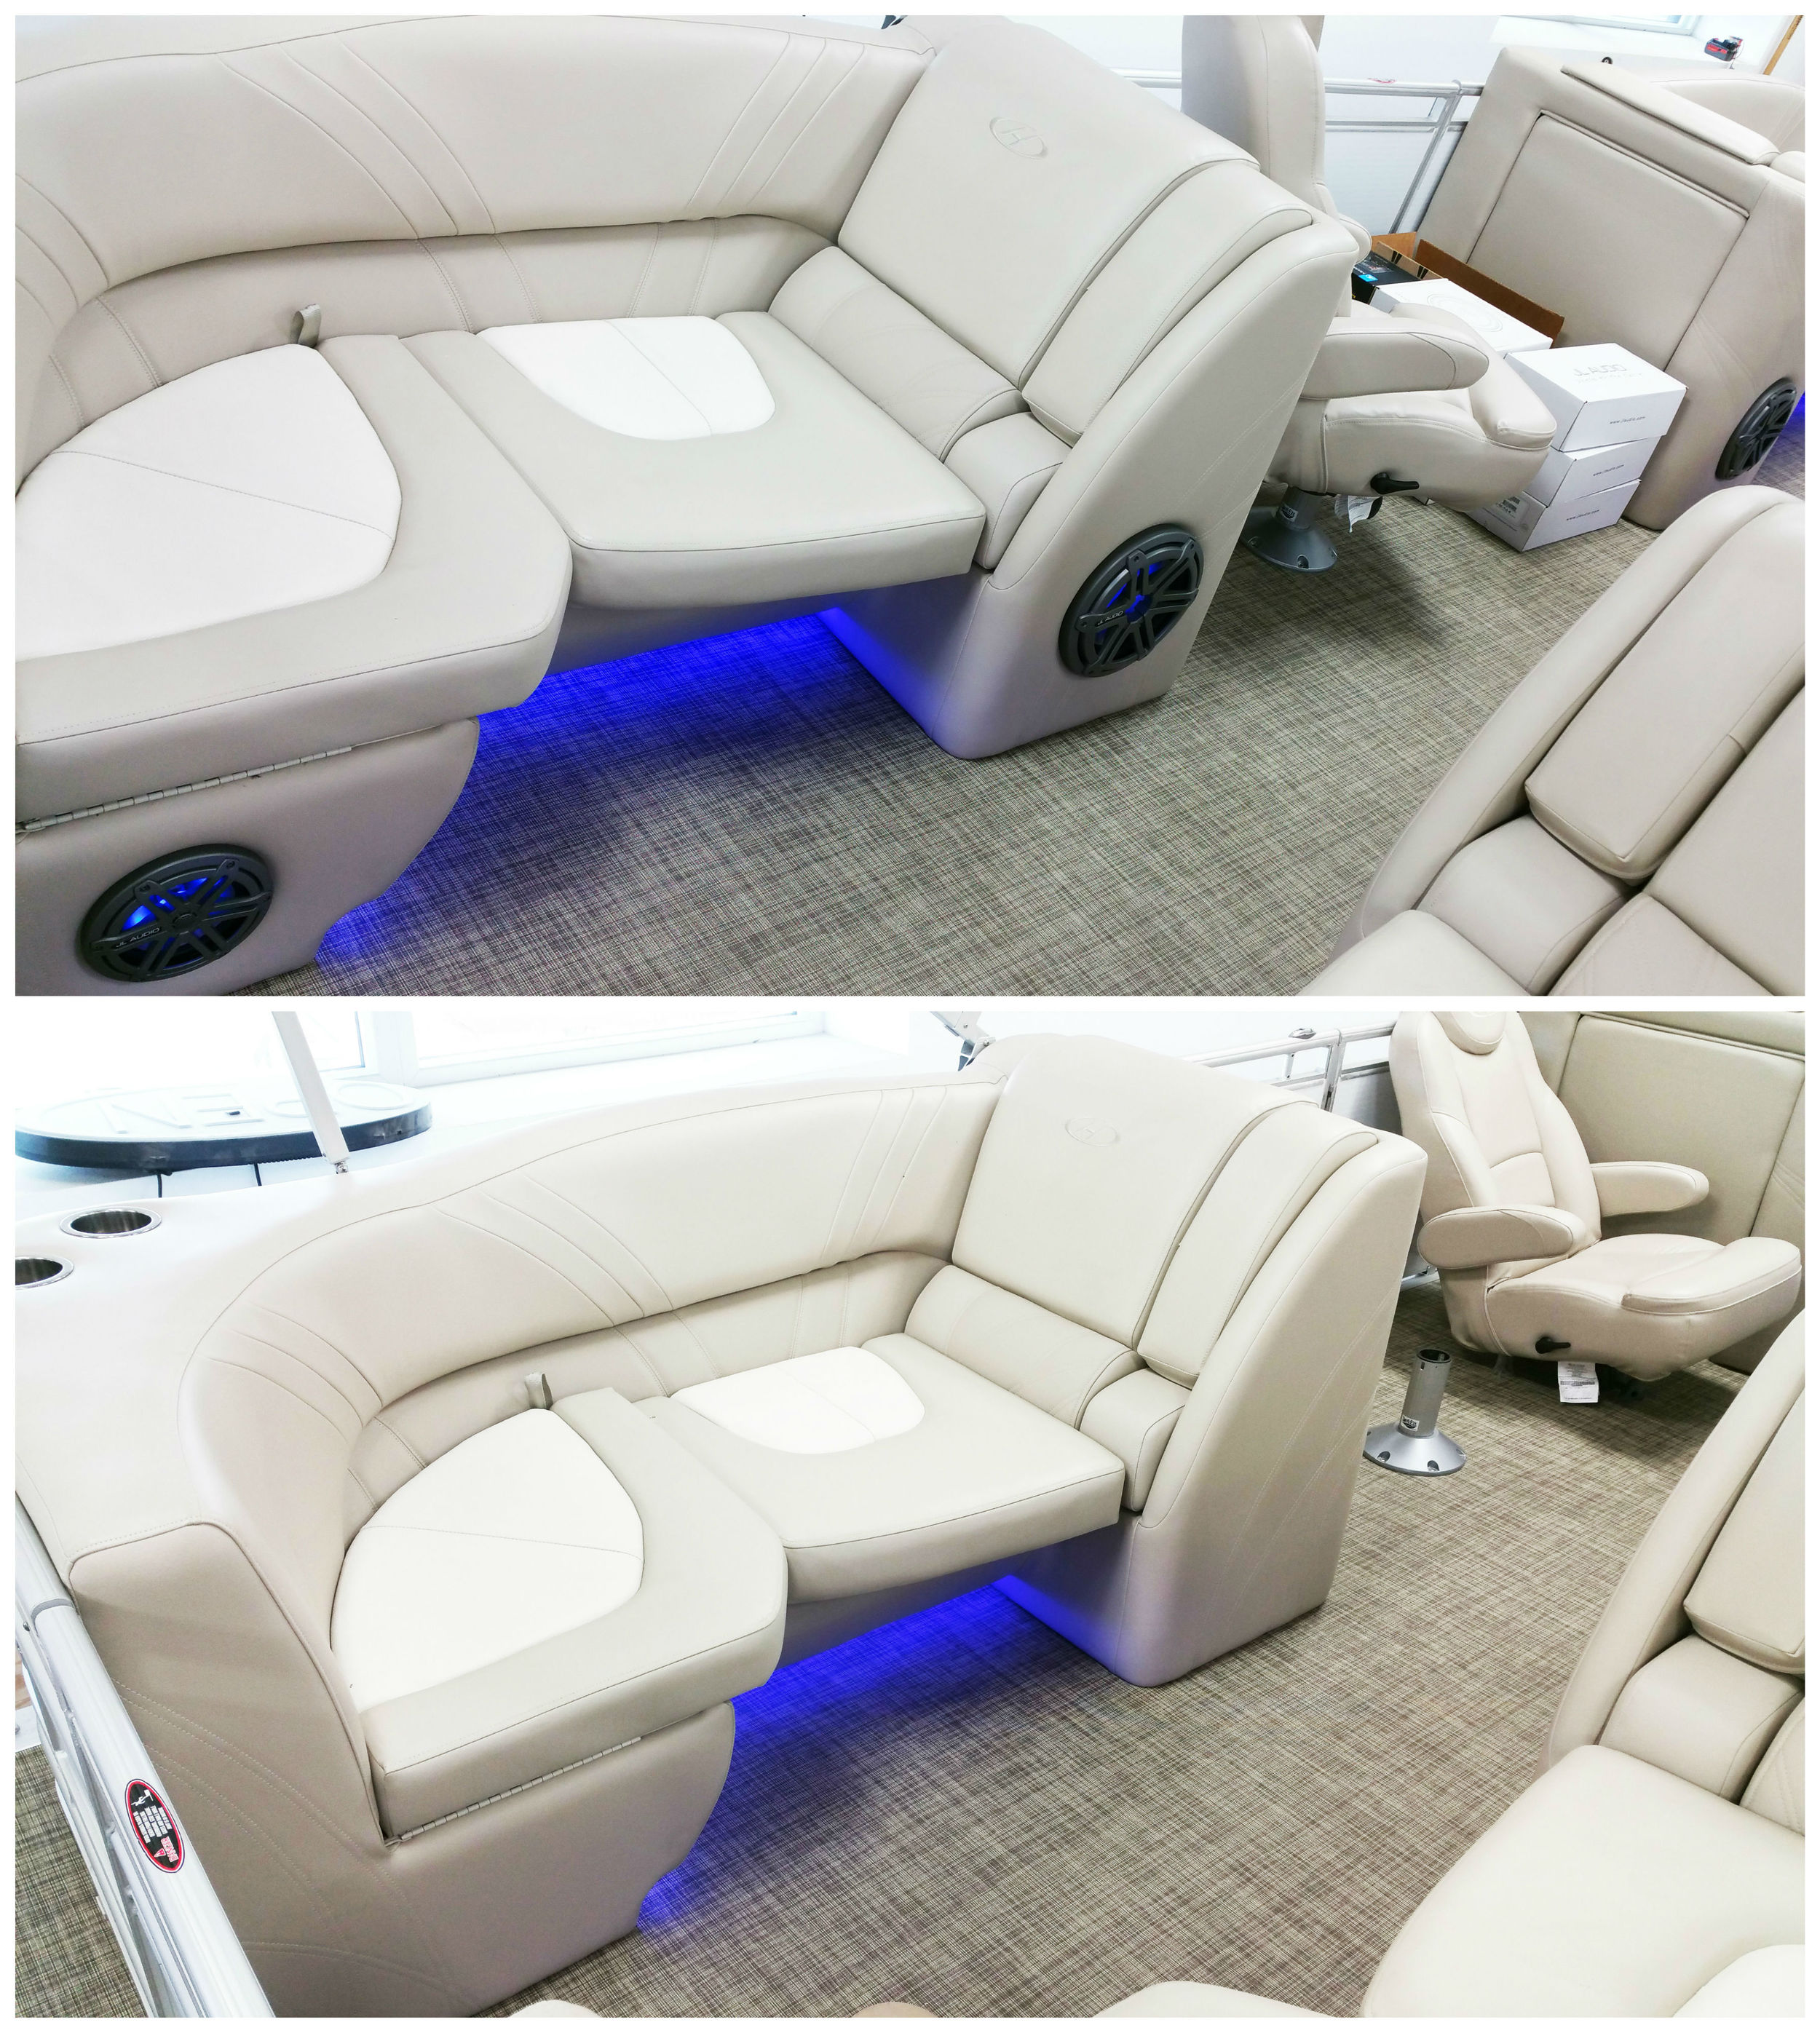 Rear Zone: Added a pair the MX650 Speakers with LED Lighting from JL Audio & another MXIB3 Subwoofer.